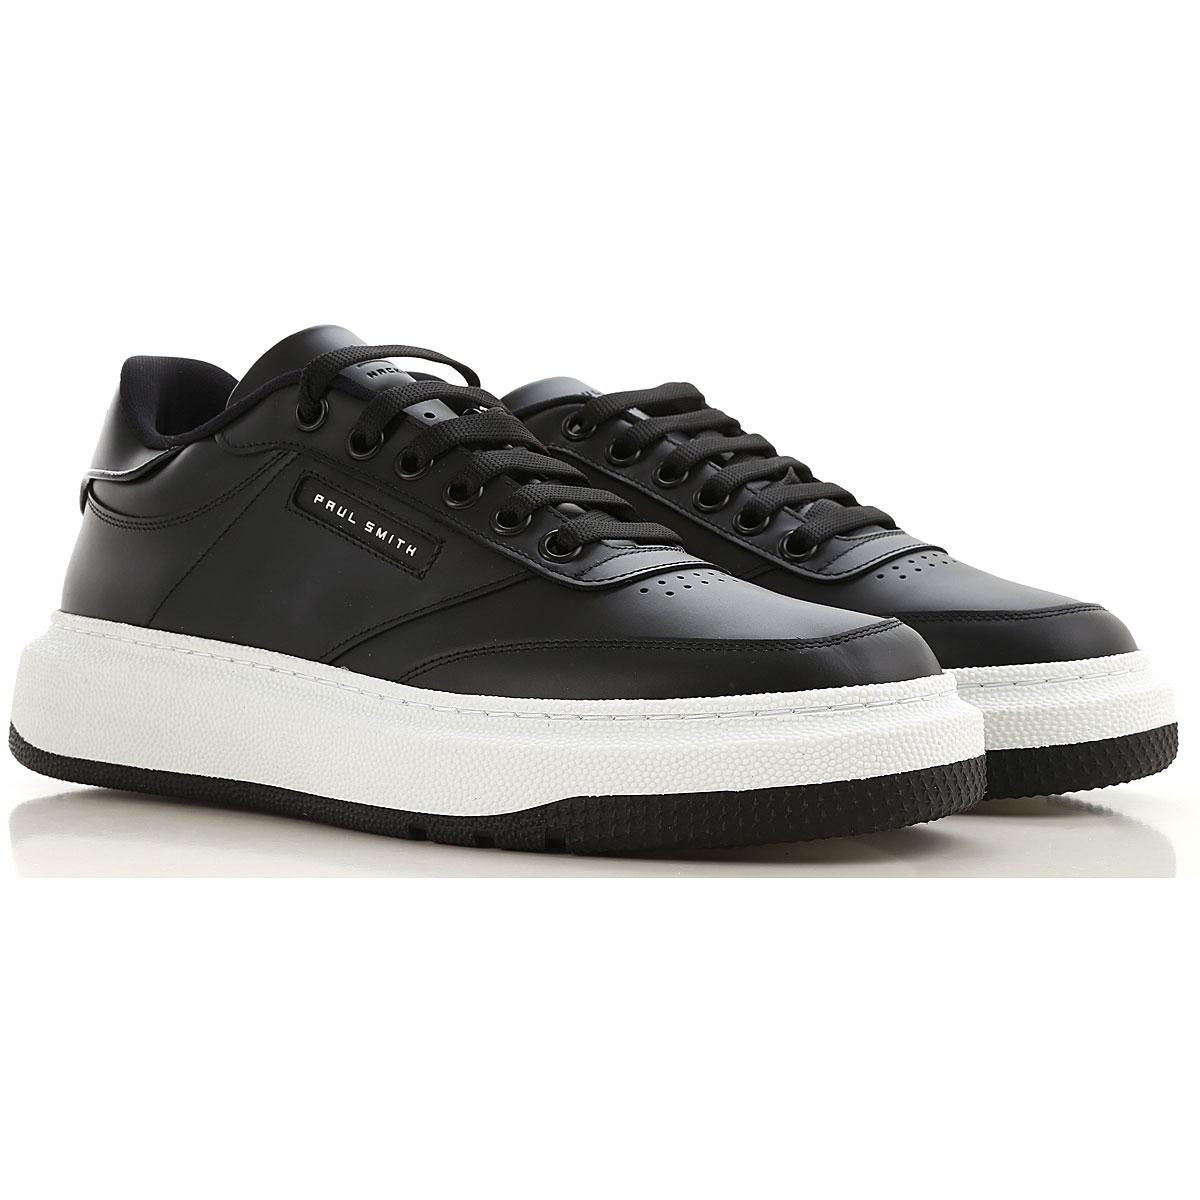 Paul Smith Hackney Leather Trainers in Black for Men - Save 38% - Lyst